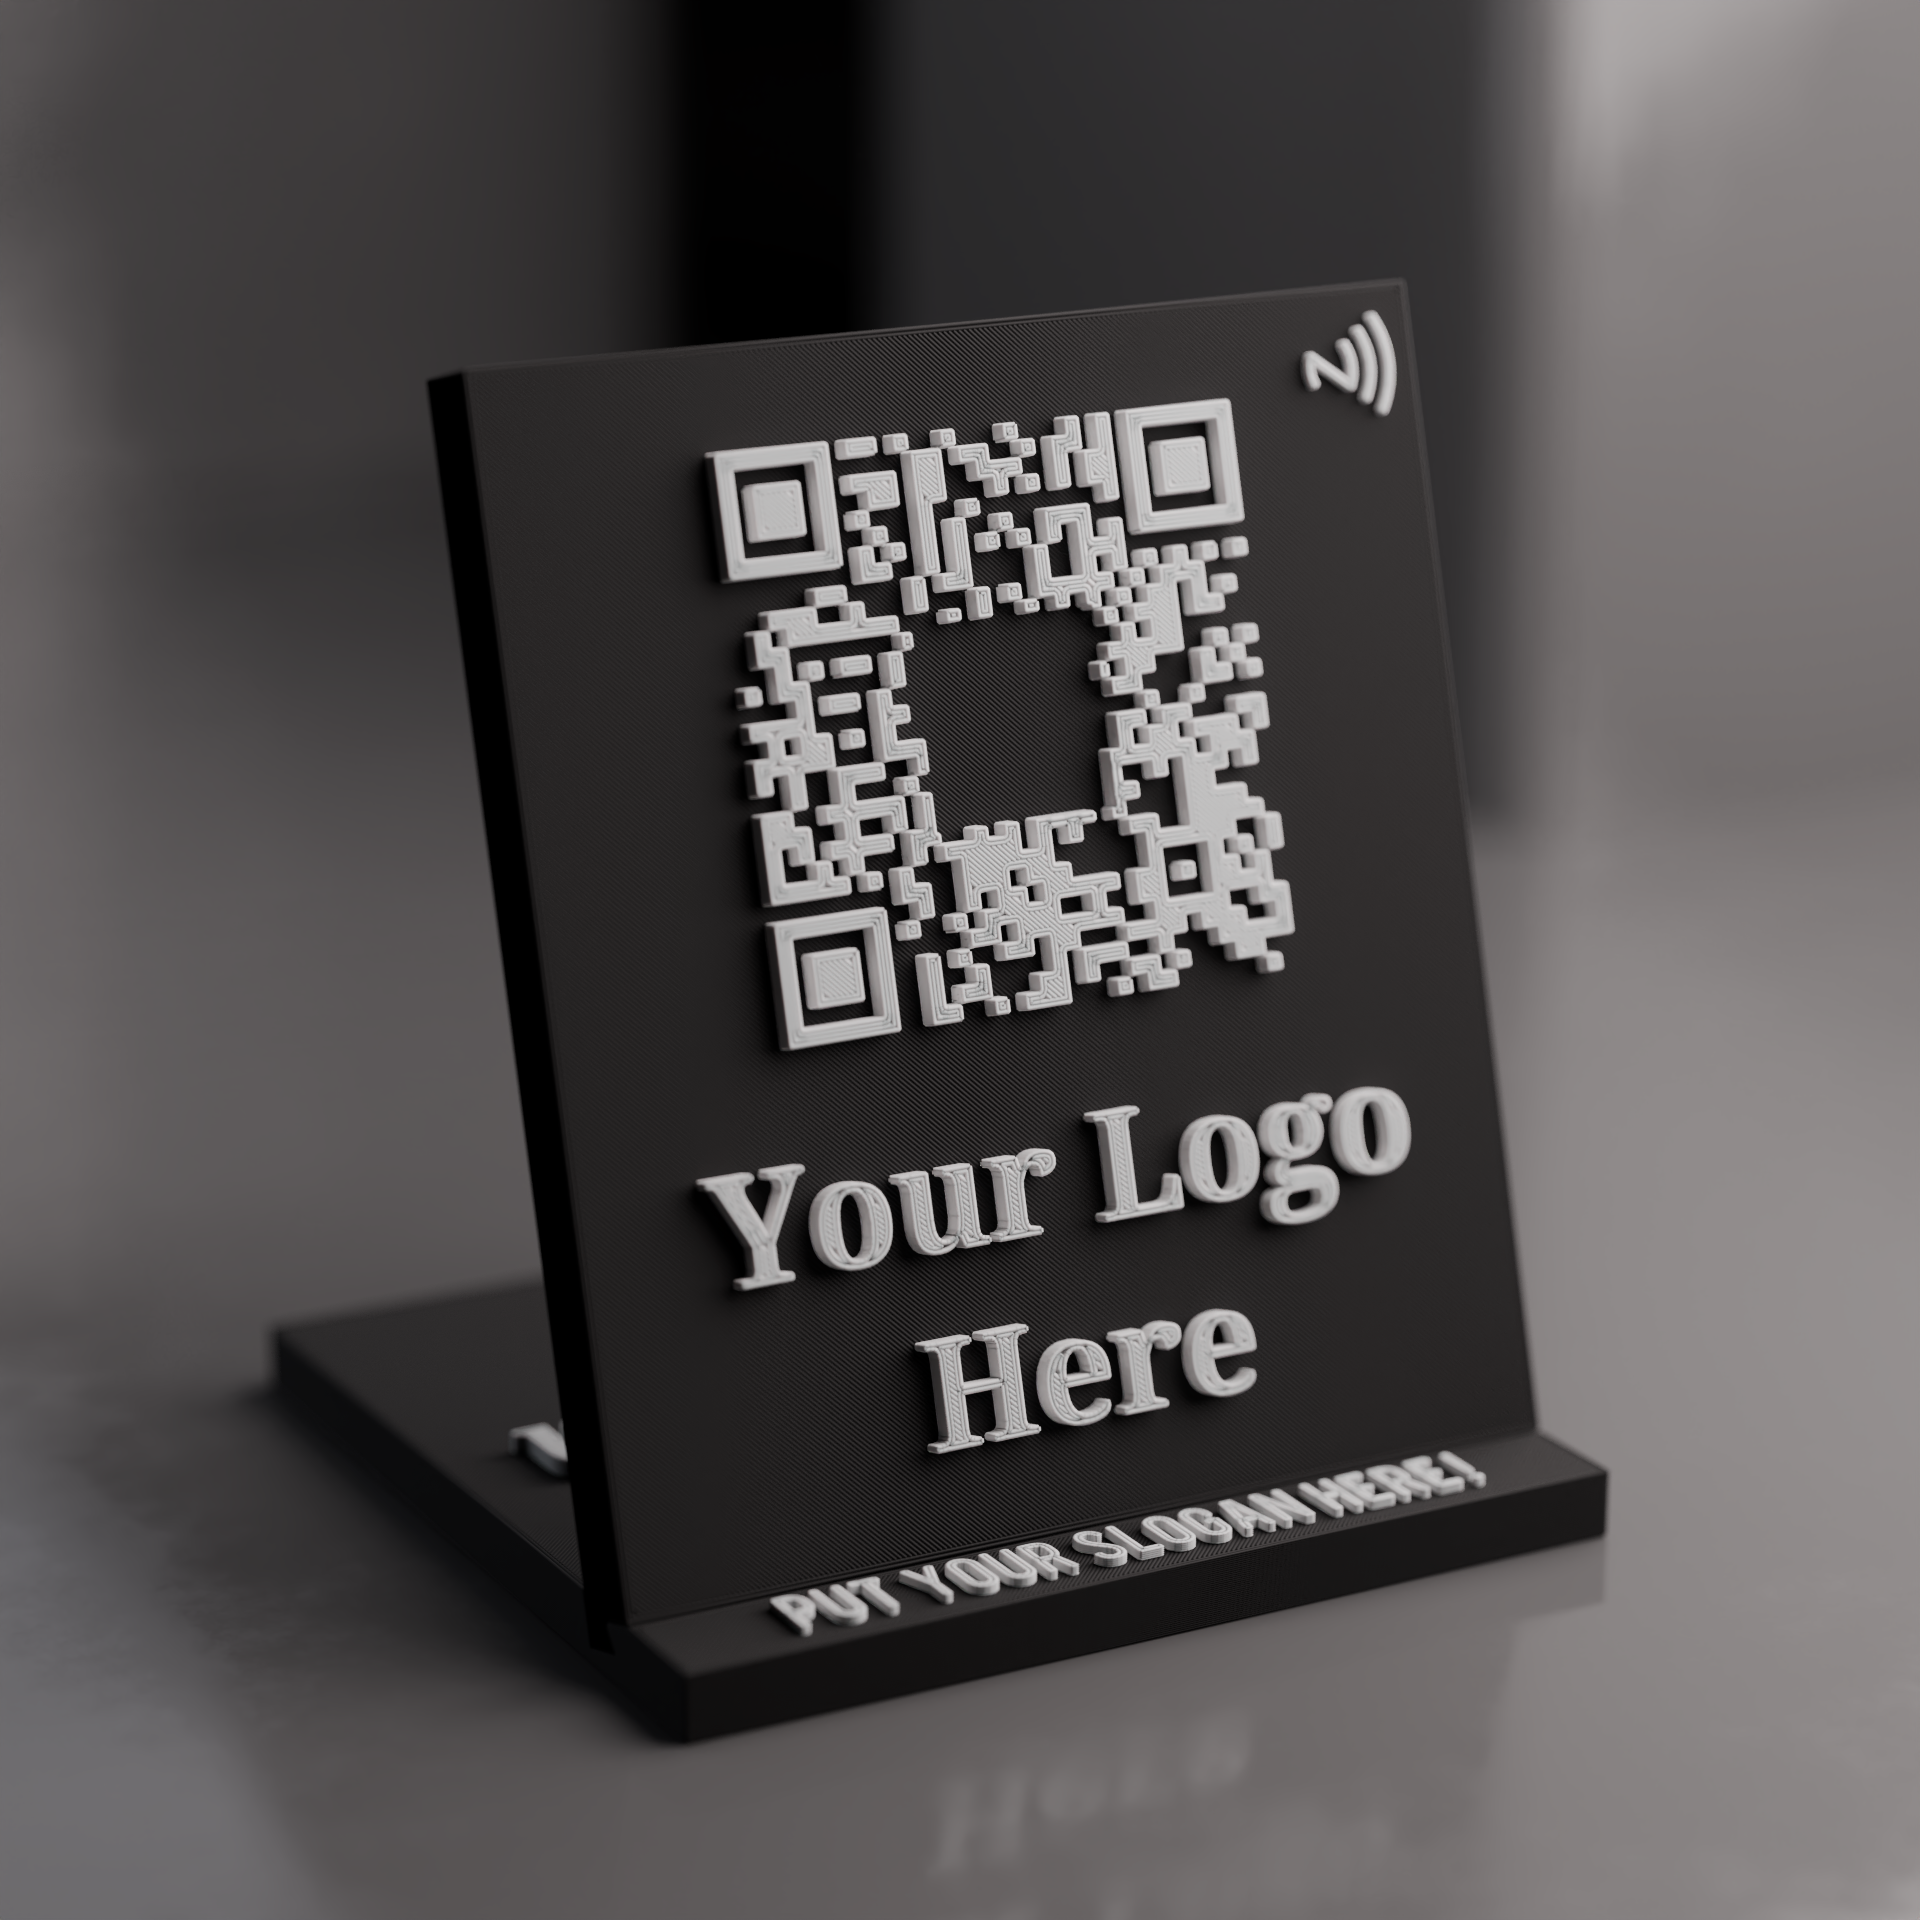 Customize your qr stand completely, add your logo, slogan, and shop colors